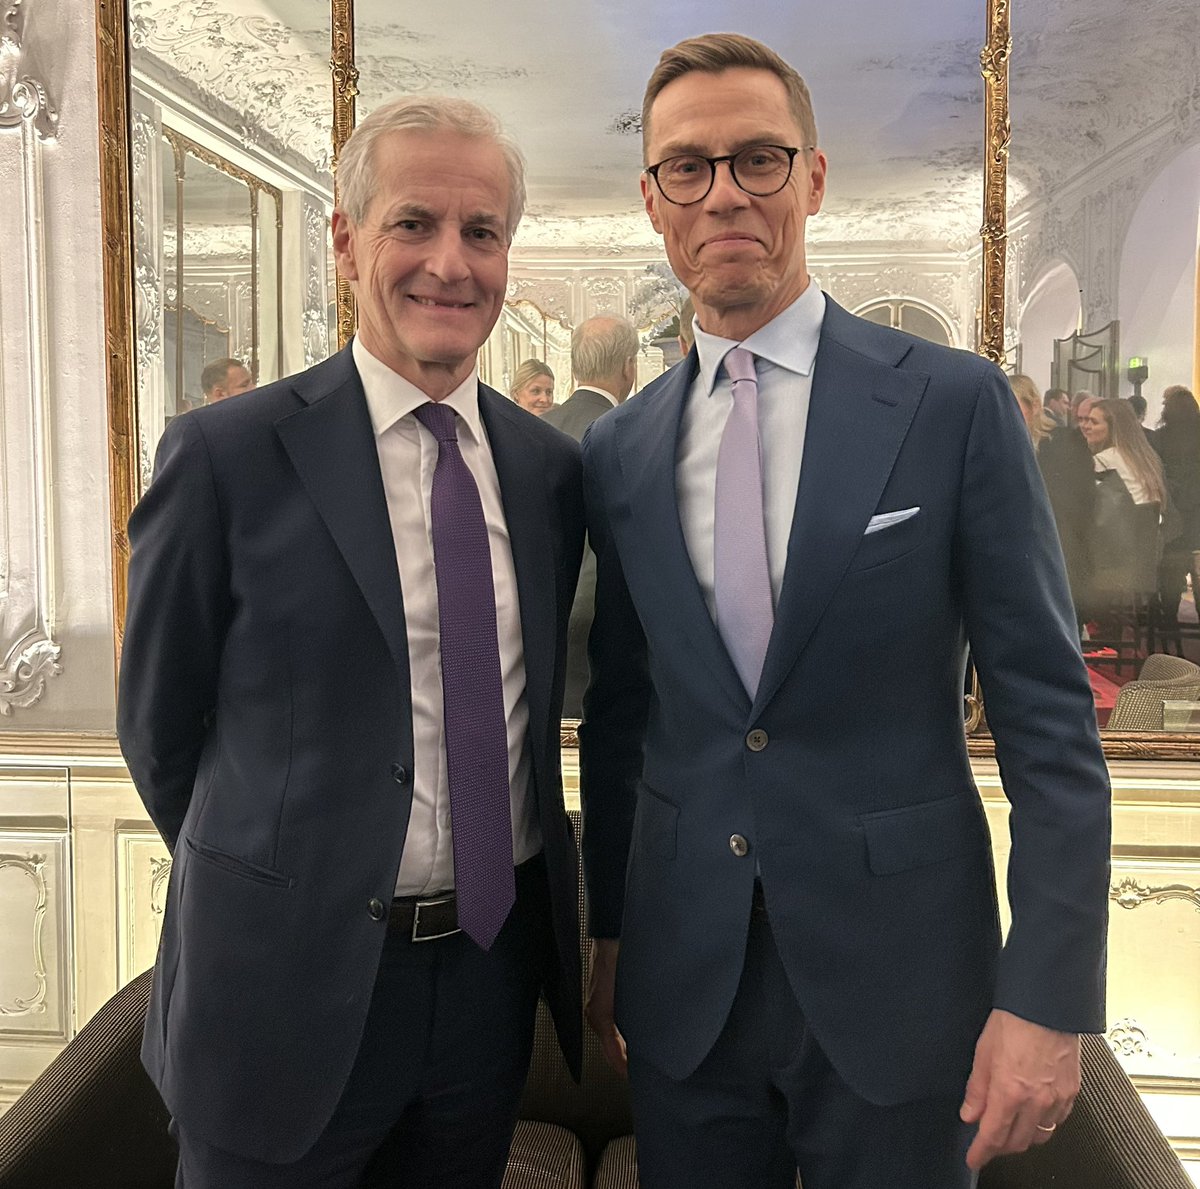 Great meeting with President-elect @alexstubb today. Norway and Finland’s cooperation on security continues to deepen, as NATO allies and neighbors in the north. Our bilateral relationship has never been closer. I look forward to working closely with you in the years to come.